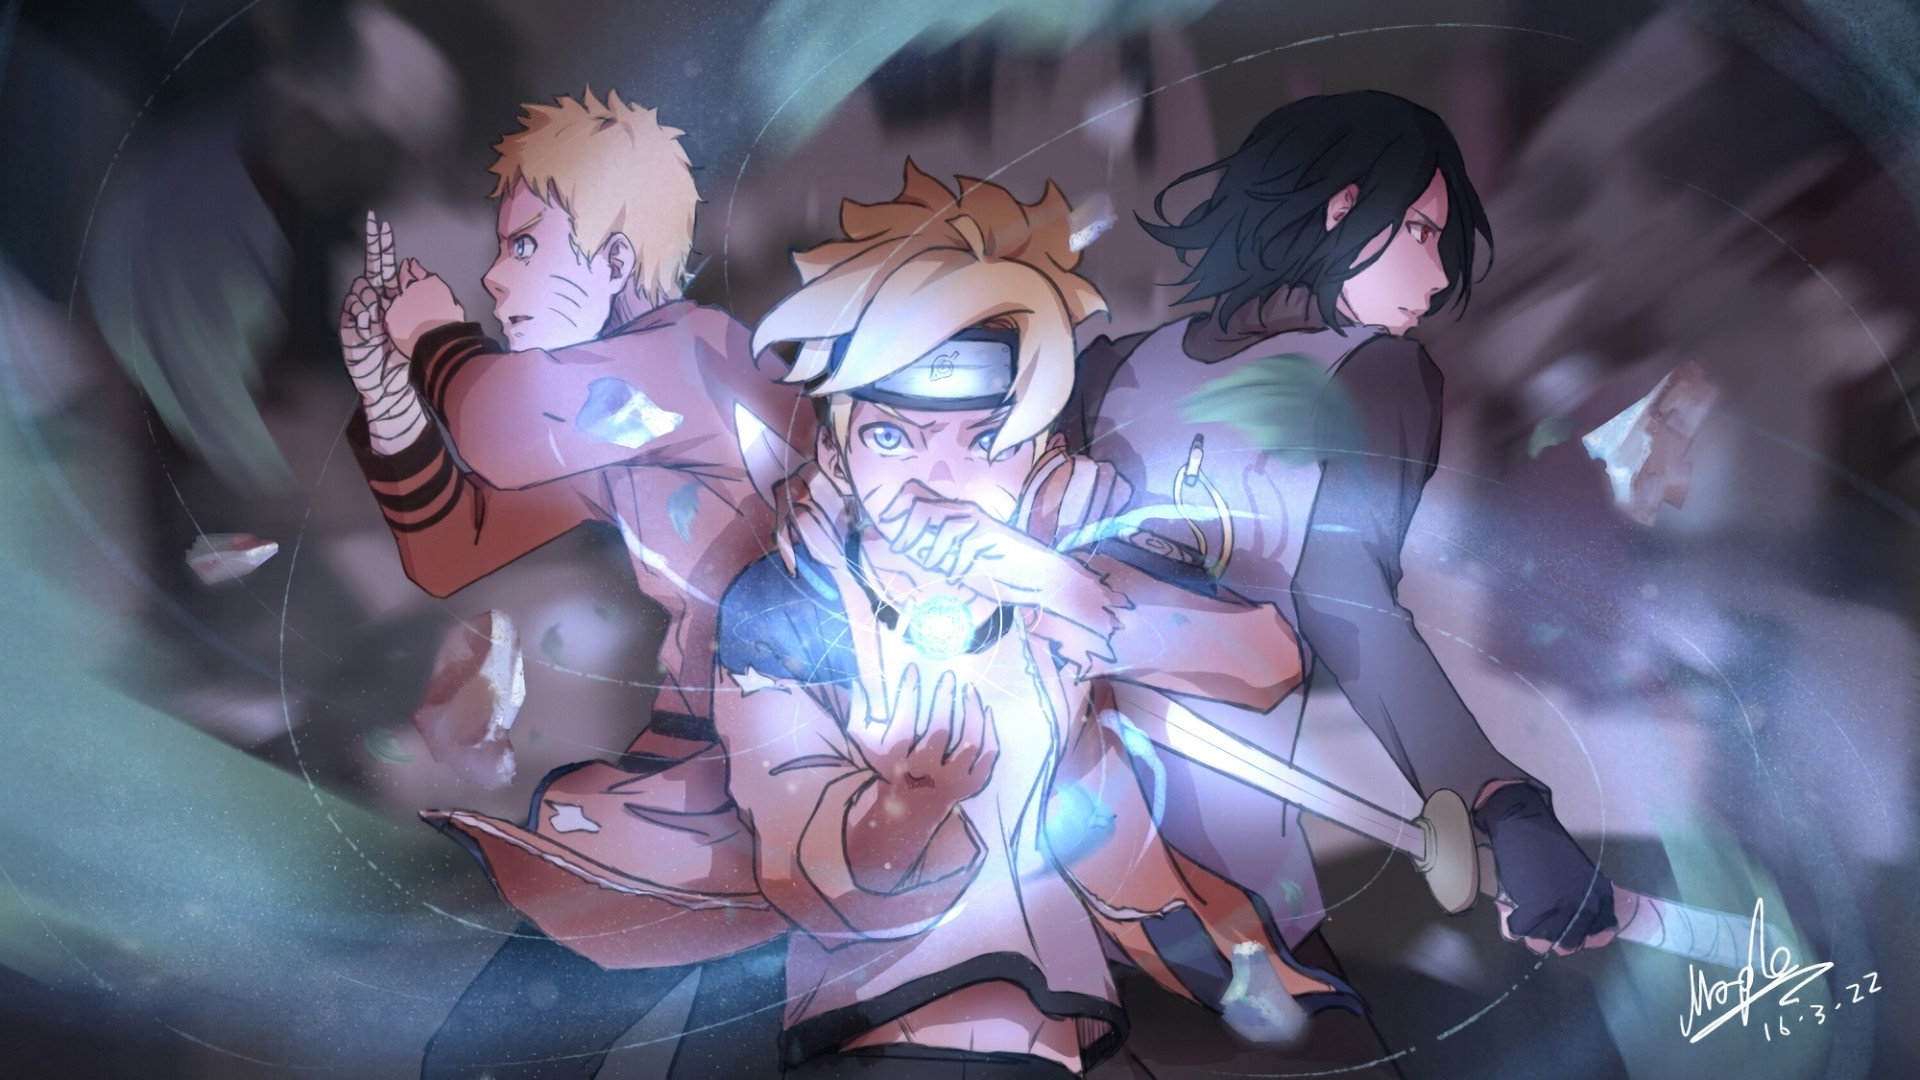 Best Boruto: Naruto The Movie wallpaper ID:327447 for High Resolution hd 1920x1080 computer